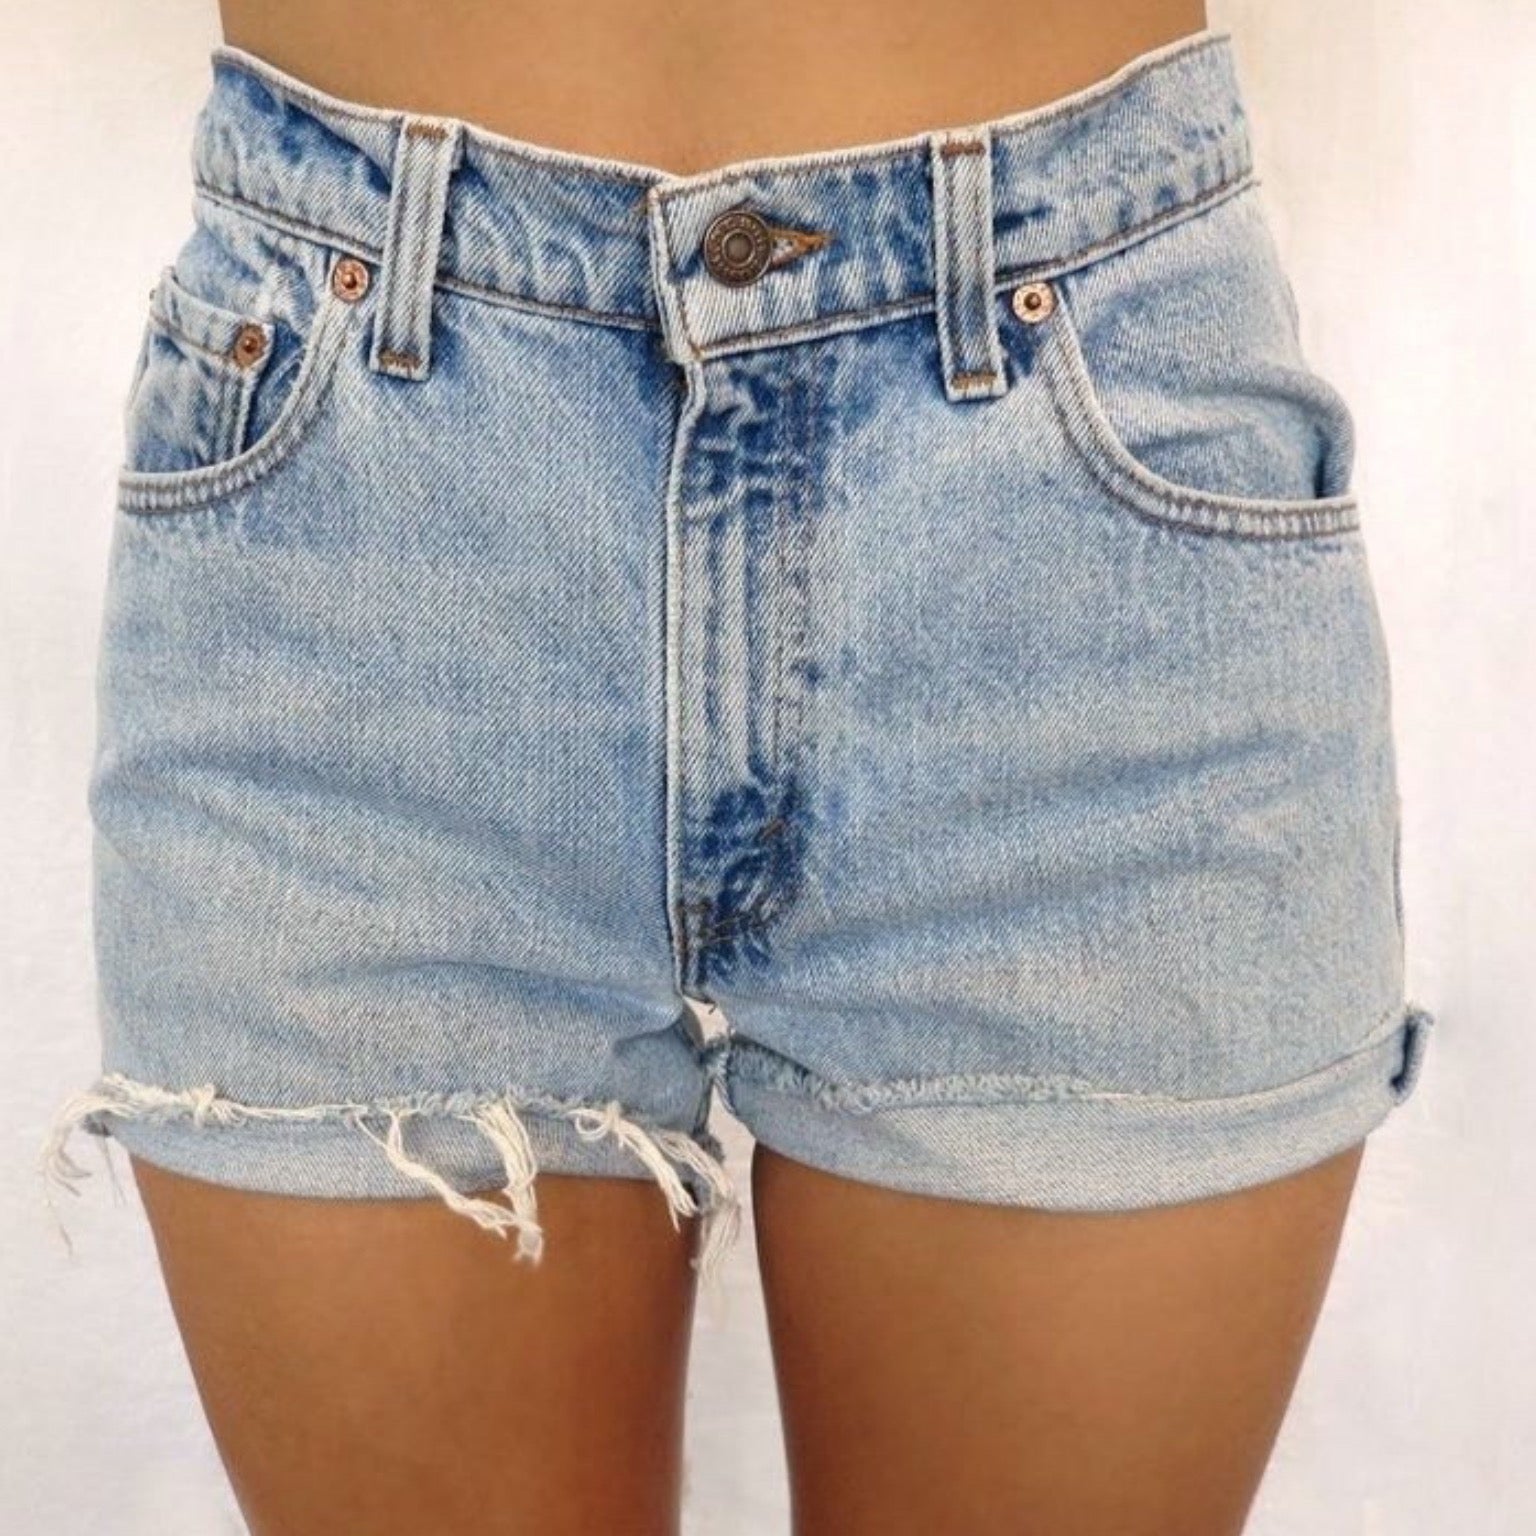 Made To Order Vintage High Waisted Cuffed Cut Off Shorts